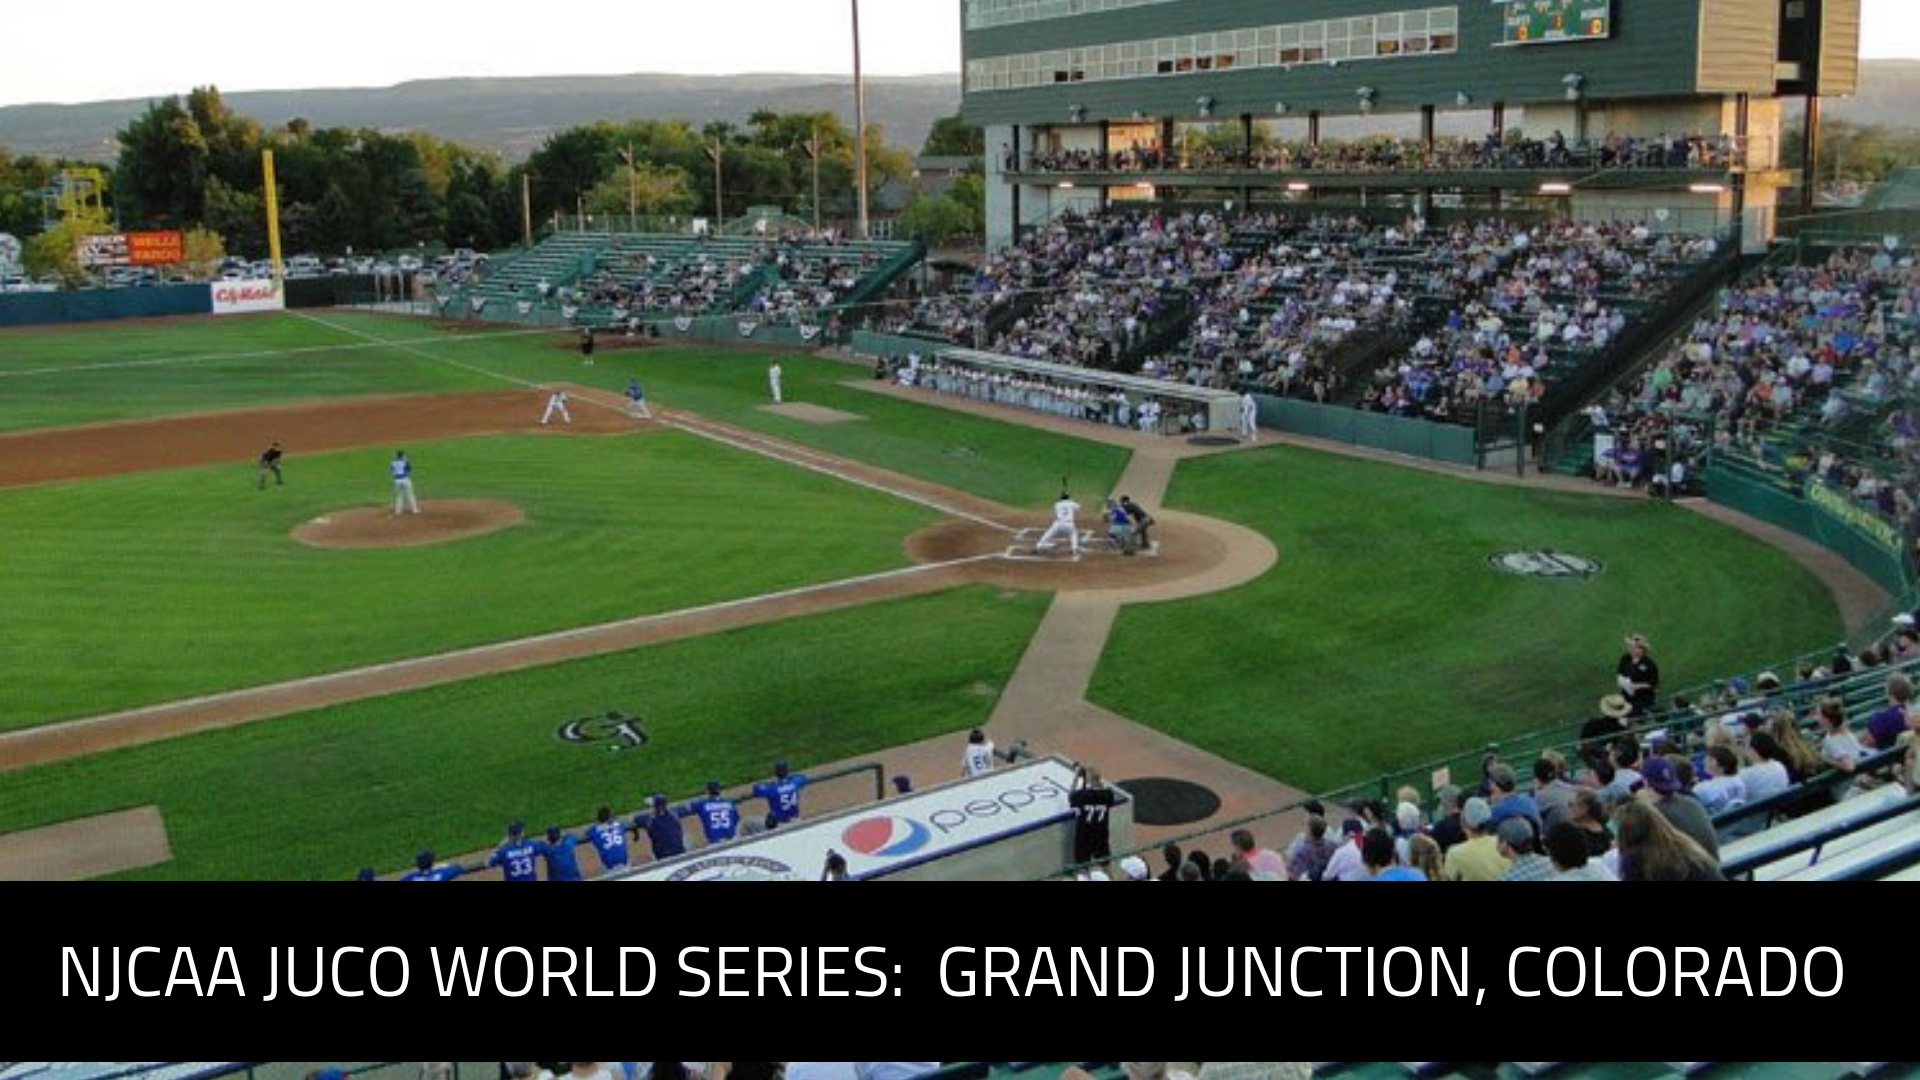 JUCO World Series Appearances